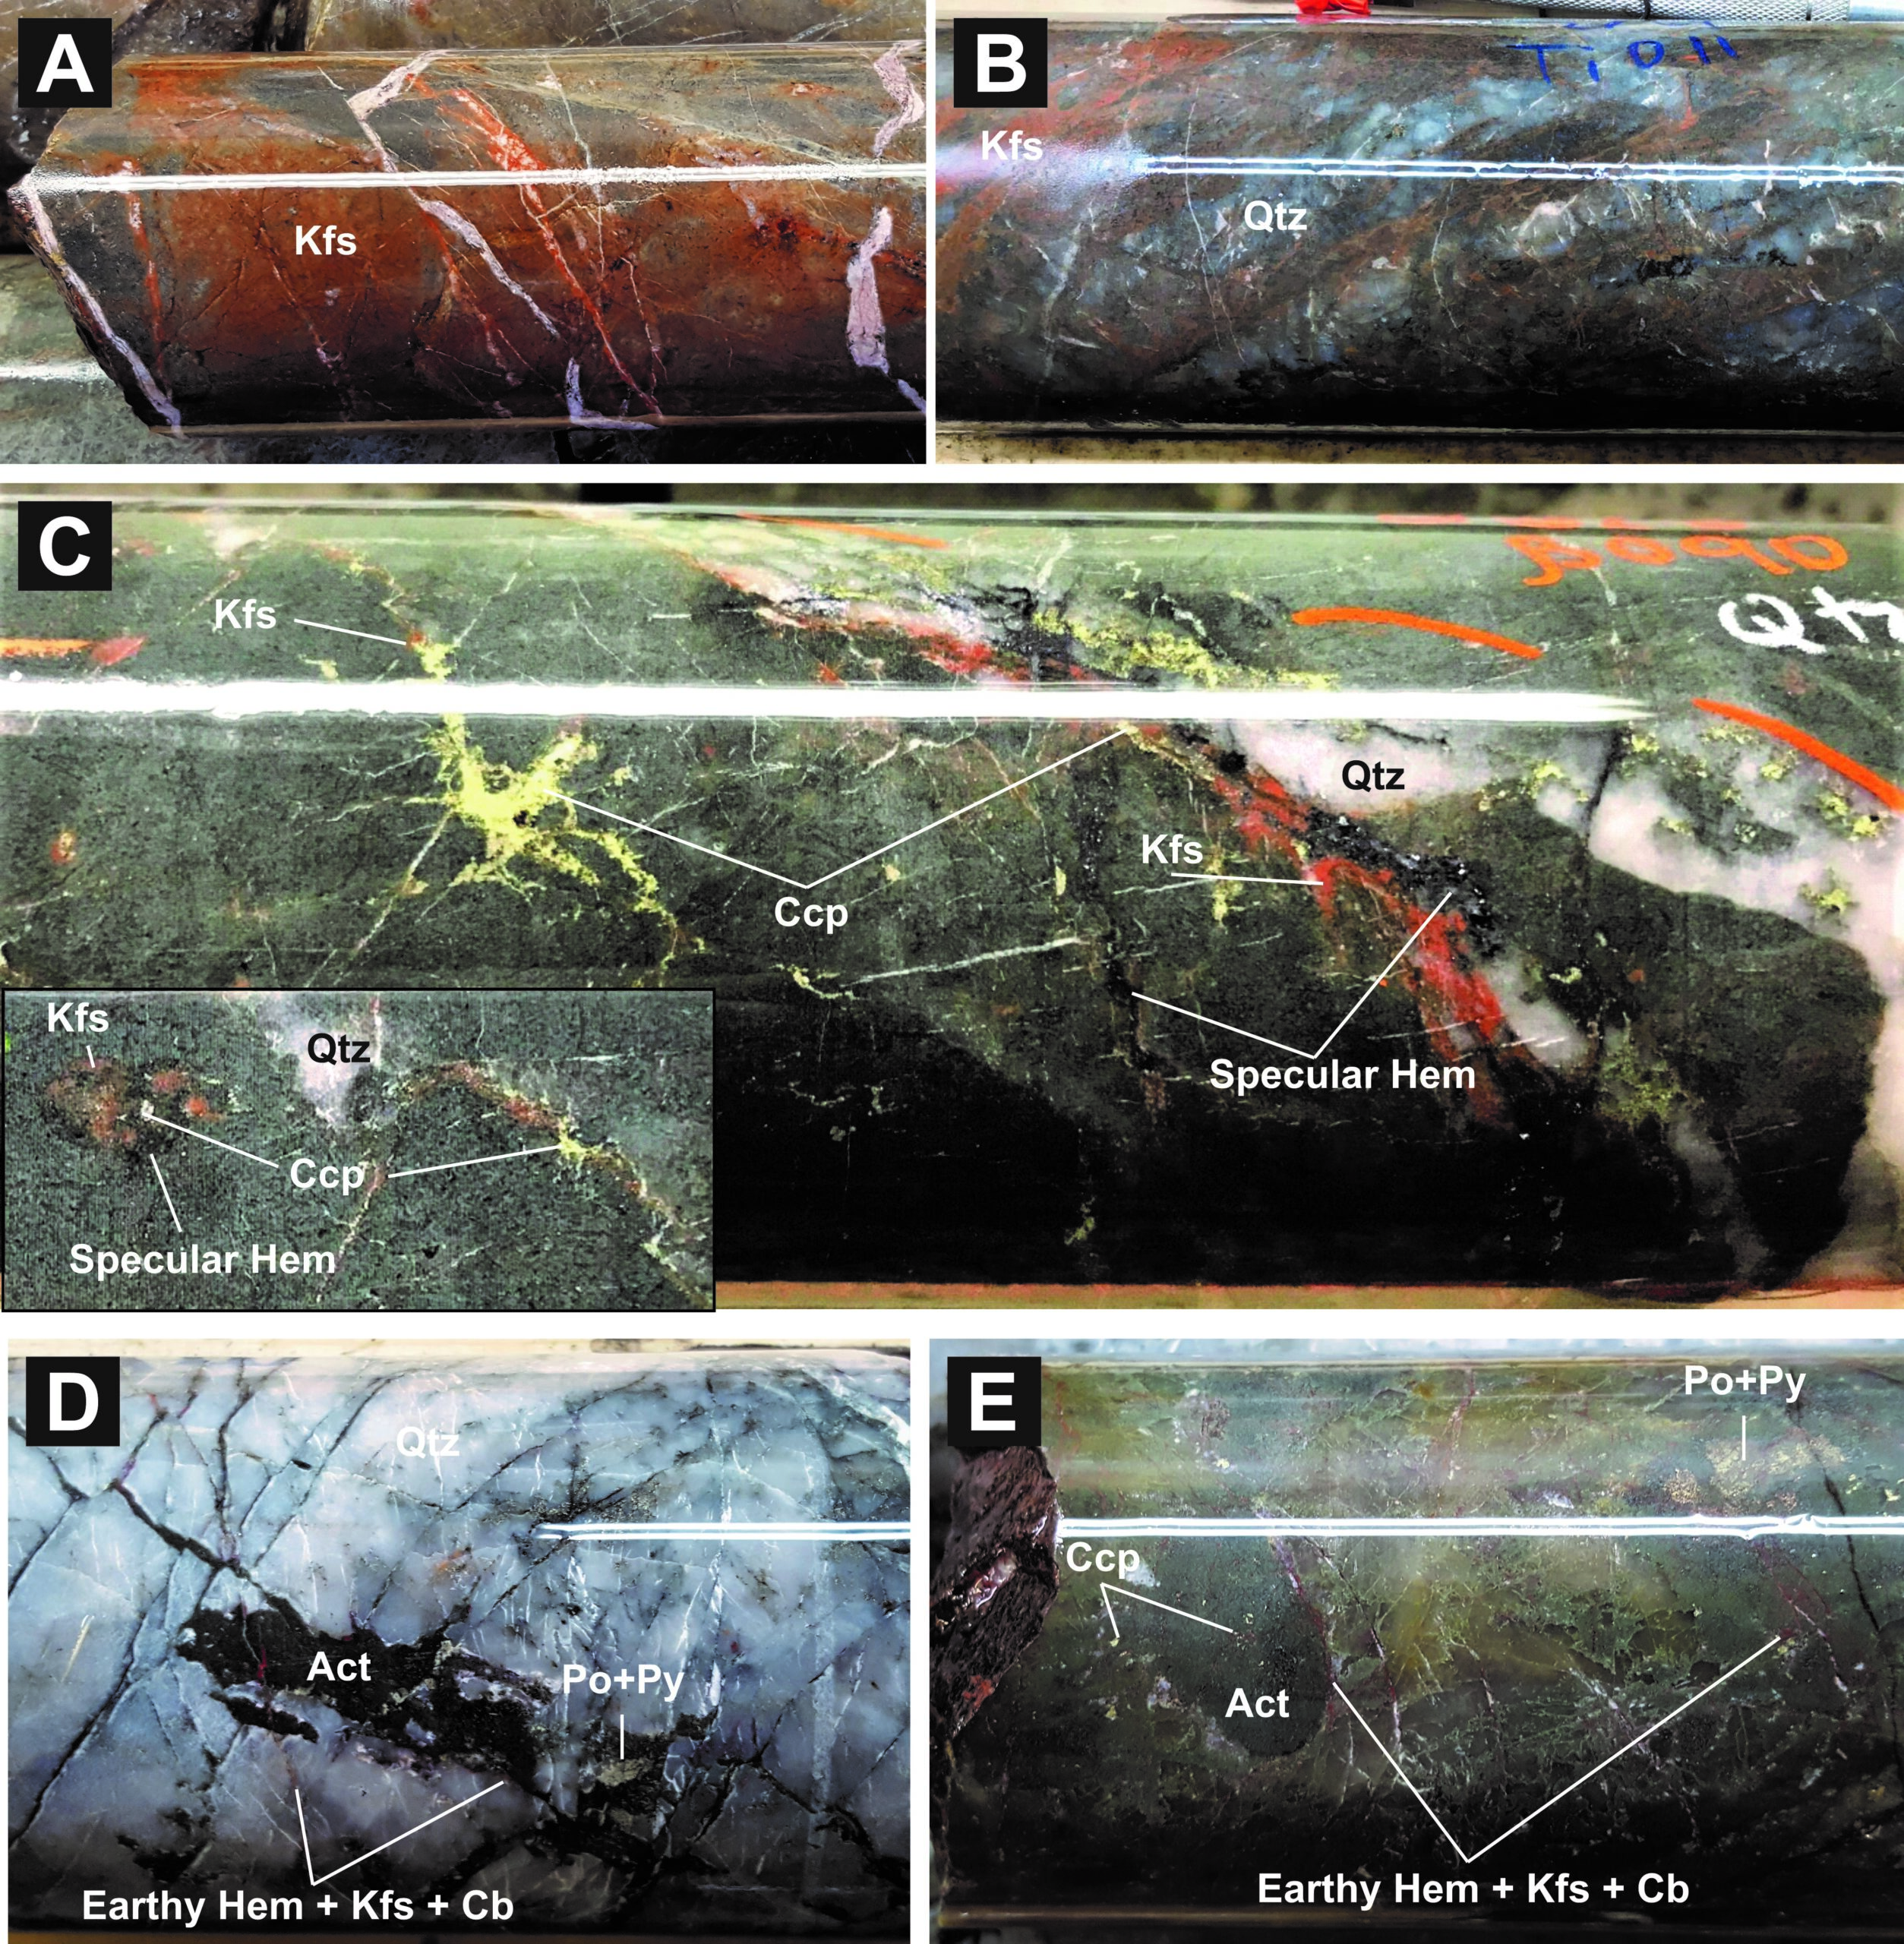 Pictures of the Si-(Fe)-K, LT Mg-Si-(Na,K)-Fe and LT K-Fe alteration facies associated with Cu-Au mineralization at the Alwyn Prospect. A. K-feldspar alteration in the haloes of the zone of intense silicification of the host sedimentary unit. B. Intense silicification with selective K-feldspar alteration of certain layers and sporadic chalcopyrite mineralization. C. Quartz-specular hematite and specular hematite-K-feldspar associated with chalcopyrite mineralization. D. Actinolite vein with pyrrhotite and pyrite crosscutting the intensely silicified unit and cut by earthy hematite veins with accessory K-feldspar and carbonates. E. Actinolite vein and alteration front with pyrrhotite and pyrite associated with Co and Ni enrichments evolving to chalcopyrite mineralization crosscut by earthy hematite veinlets with accessory K-feldspar and carbonates (transitioning to LT K-Fe). All the drill core pictures are from HQ core size with a diameter of 63.5 mm.